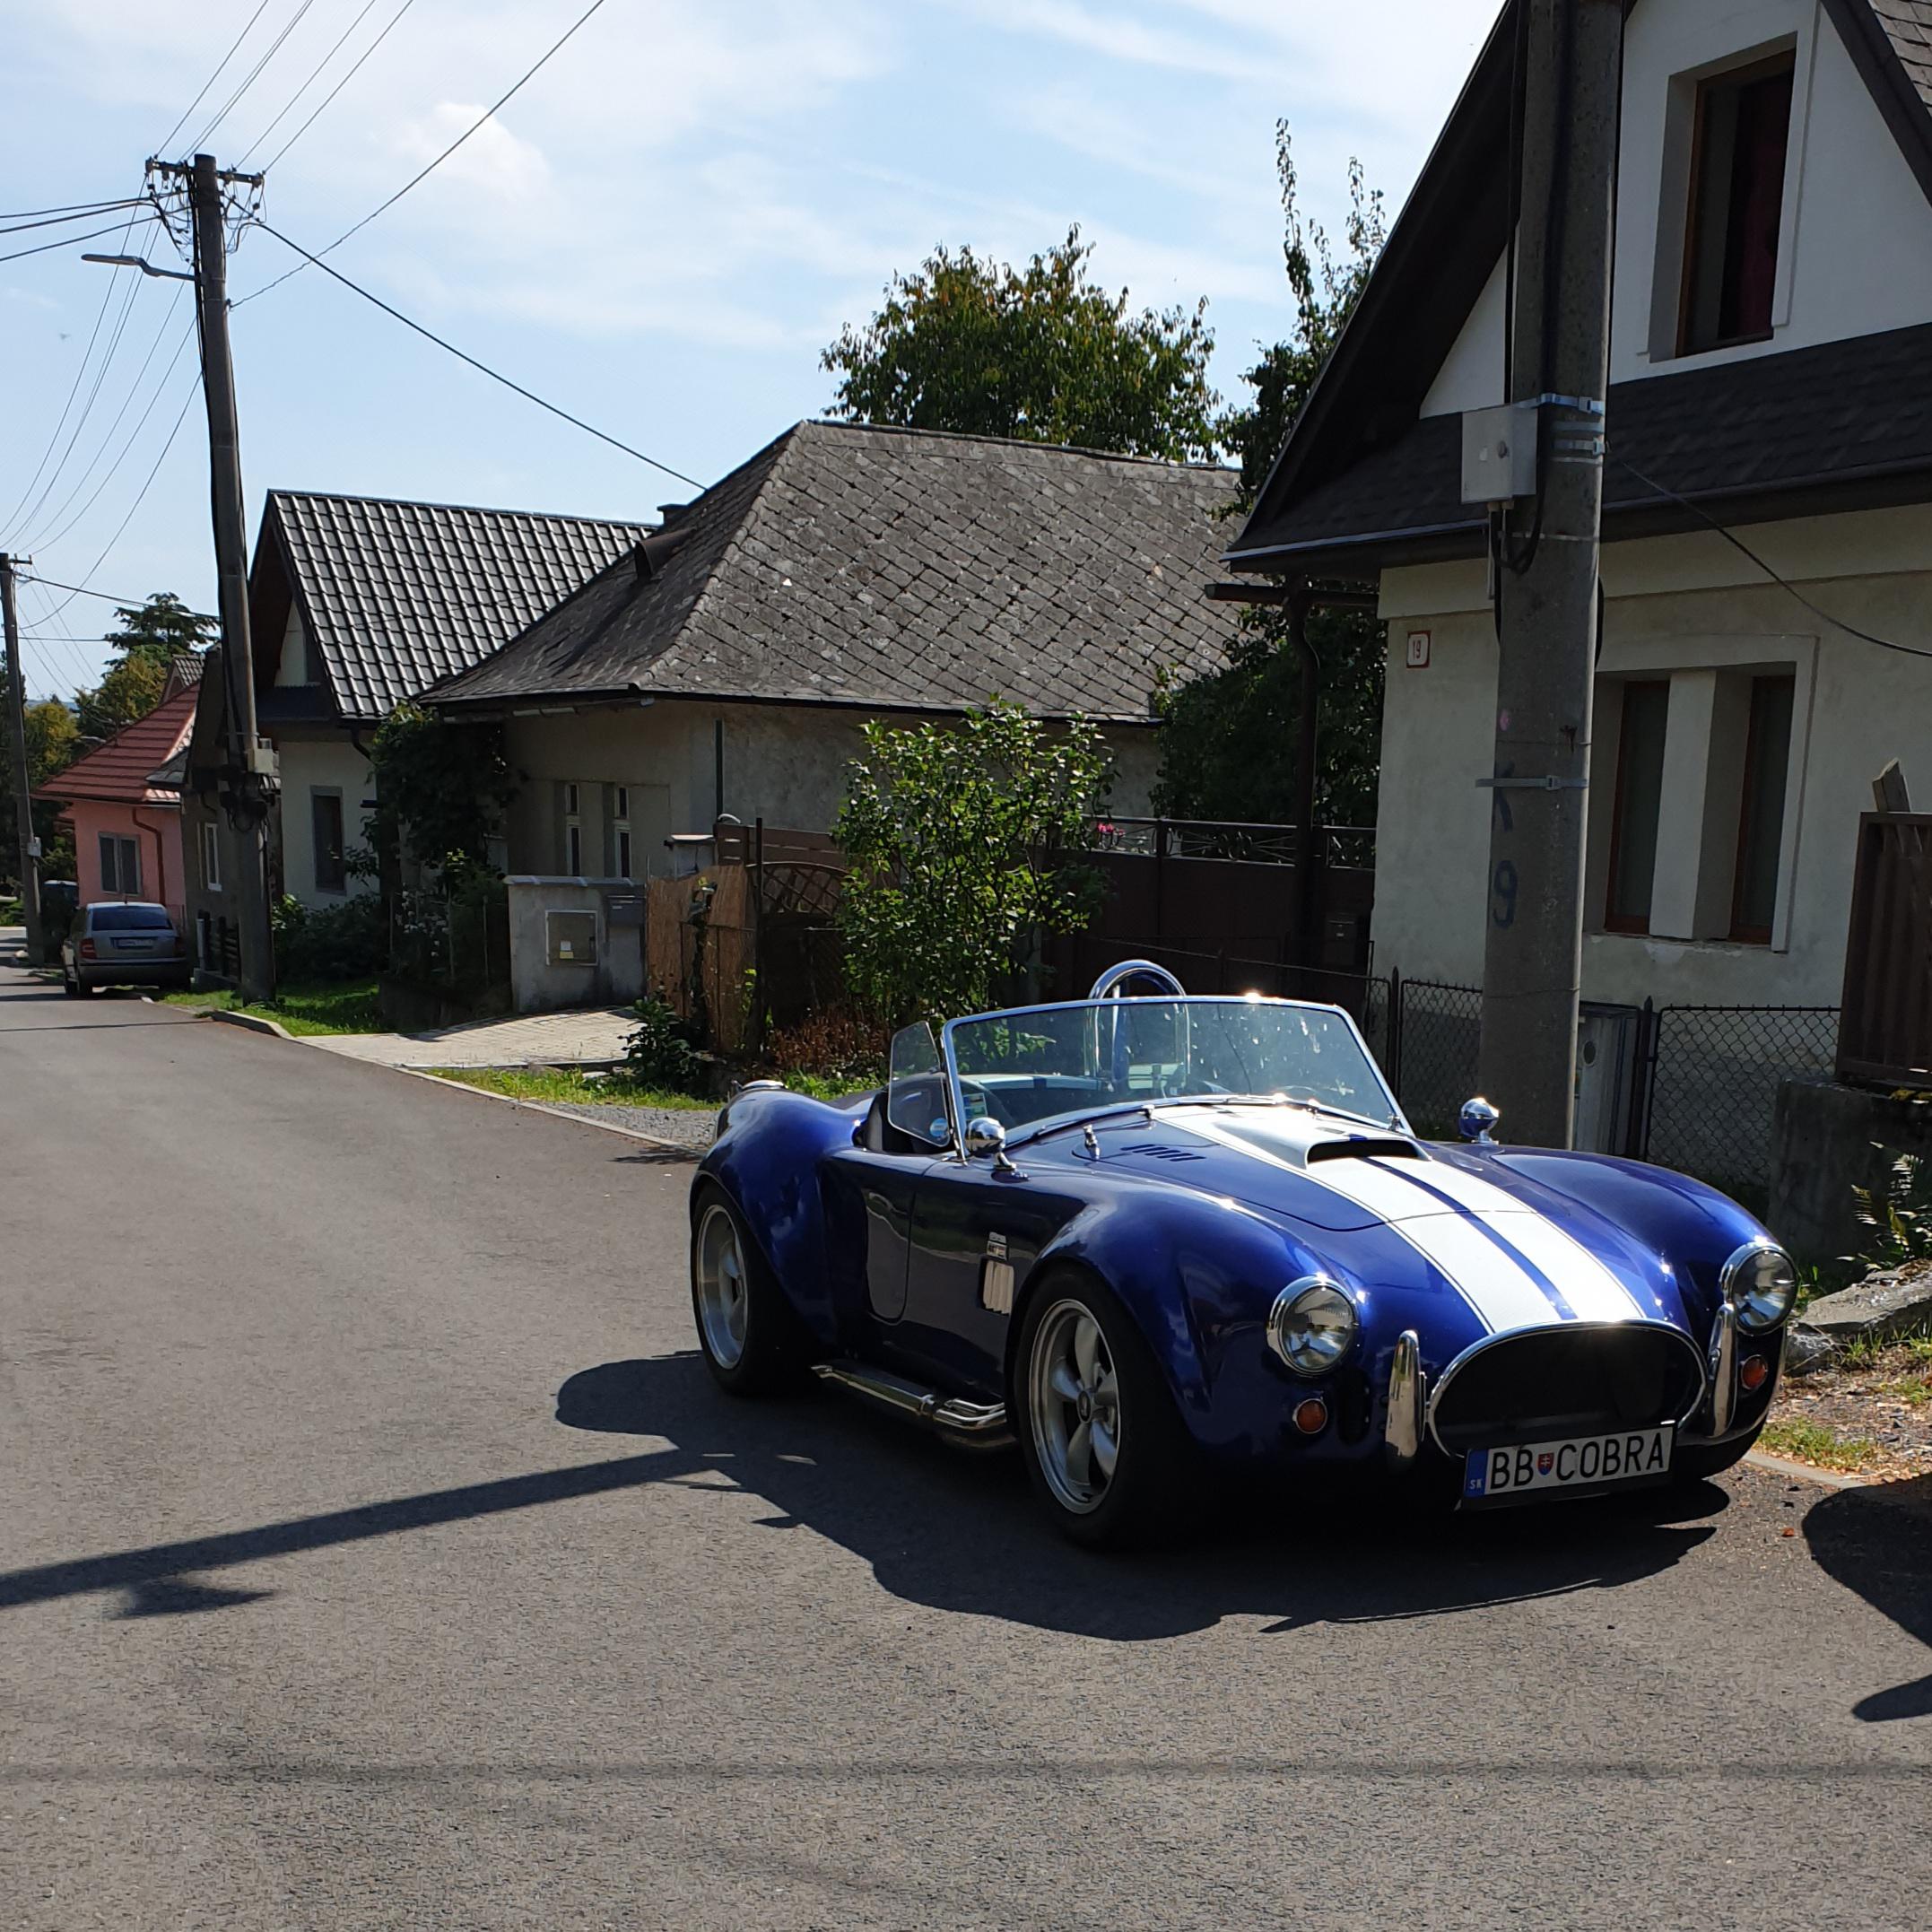 Classic Shelby Cobra. Cars like this are really rare in my country.